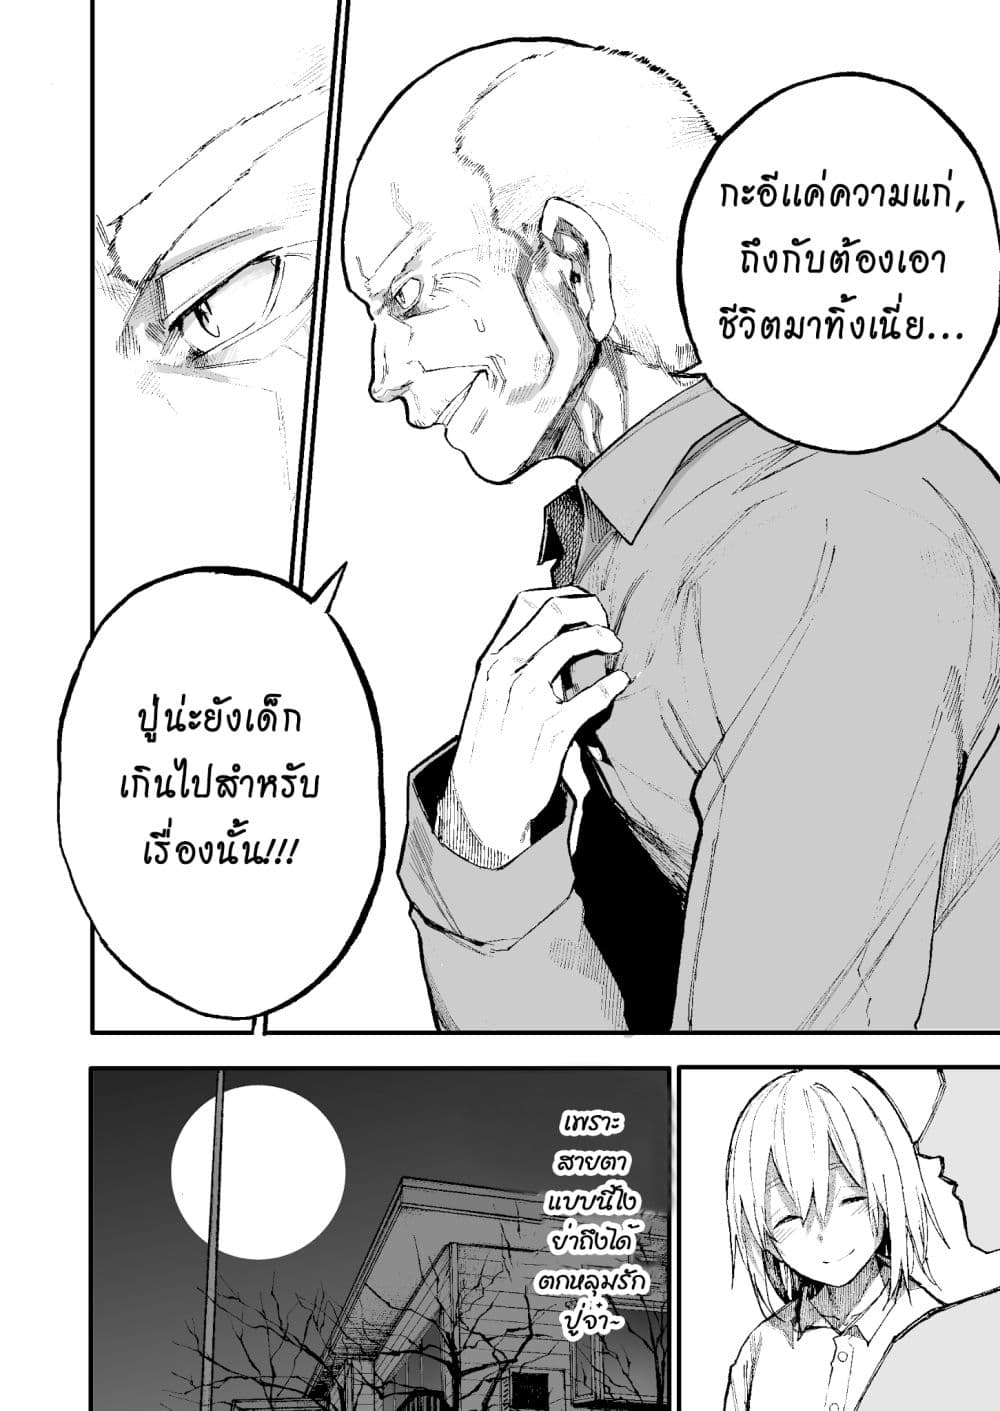 A Story About A Grampa and Granma Returned Back to their Youth คู่รักวัยดึกหวนคืนวัยหวาน 47-47